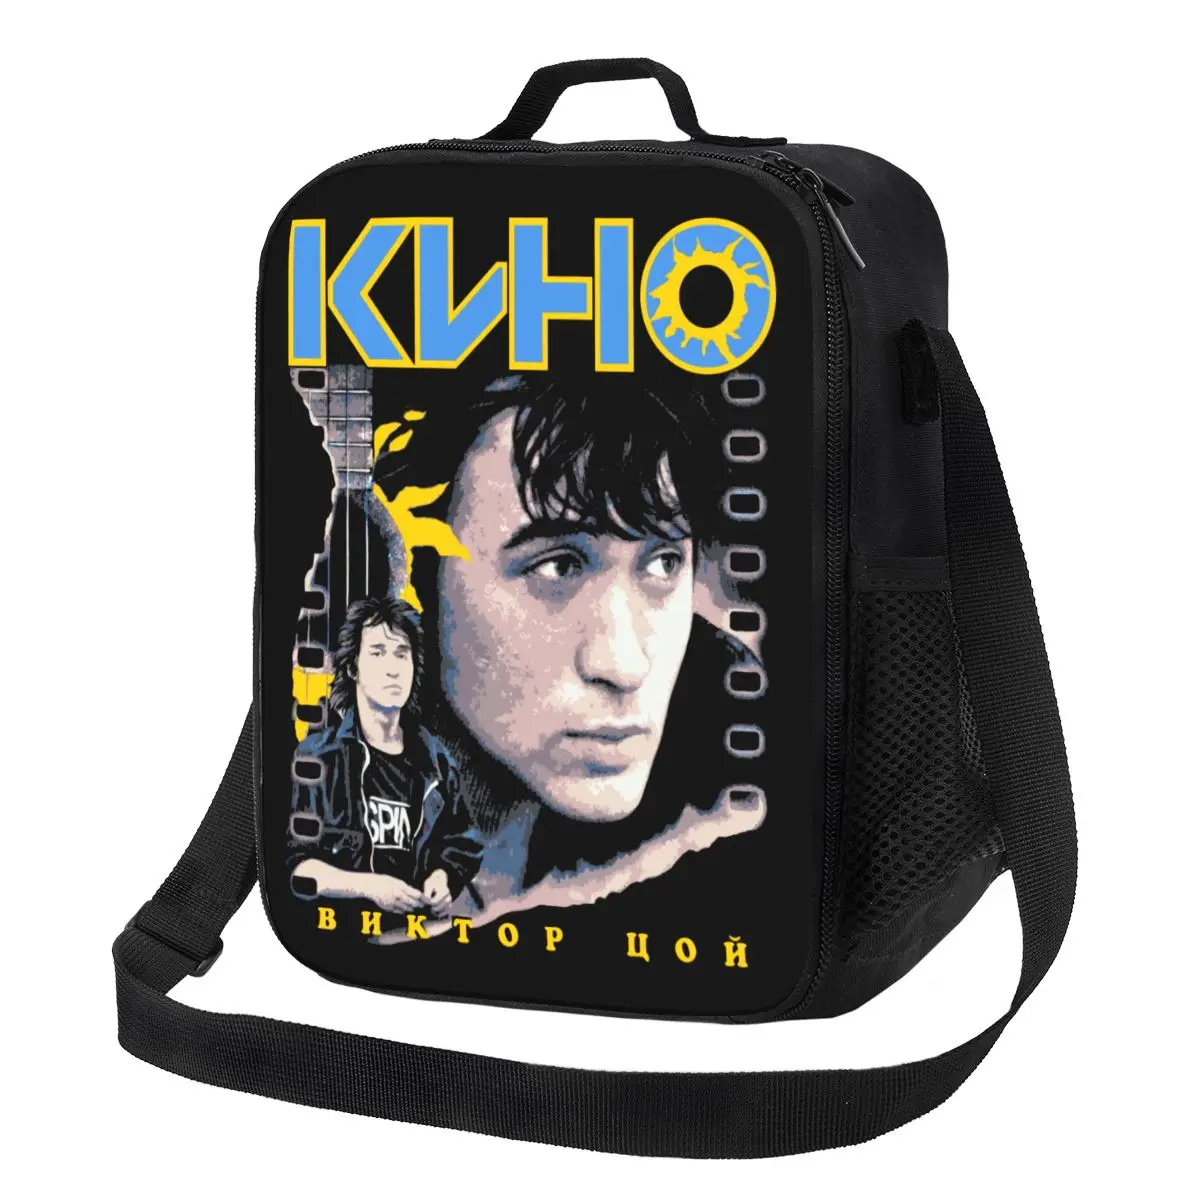 Viktor Tsoi Kino Thermal Insulated Lunch Bag Rusian Rock Portable Lunch Container for School Travel Multifunction Bento Food Box